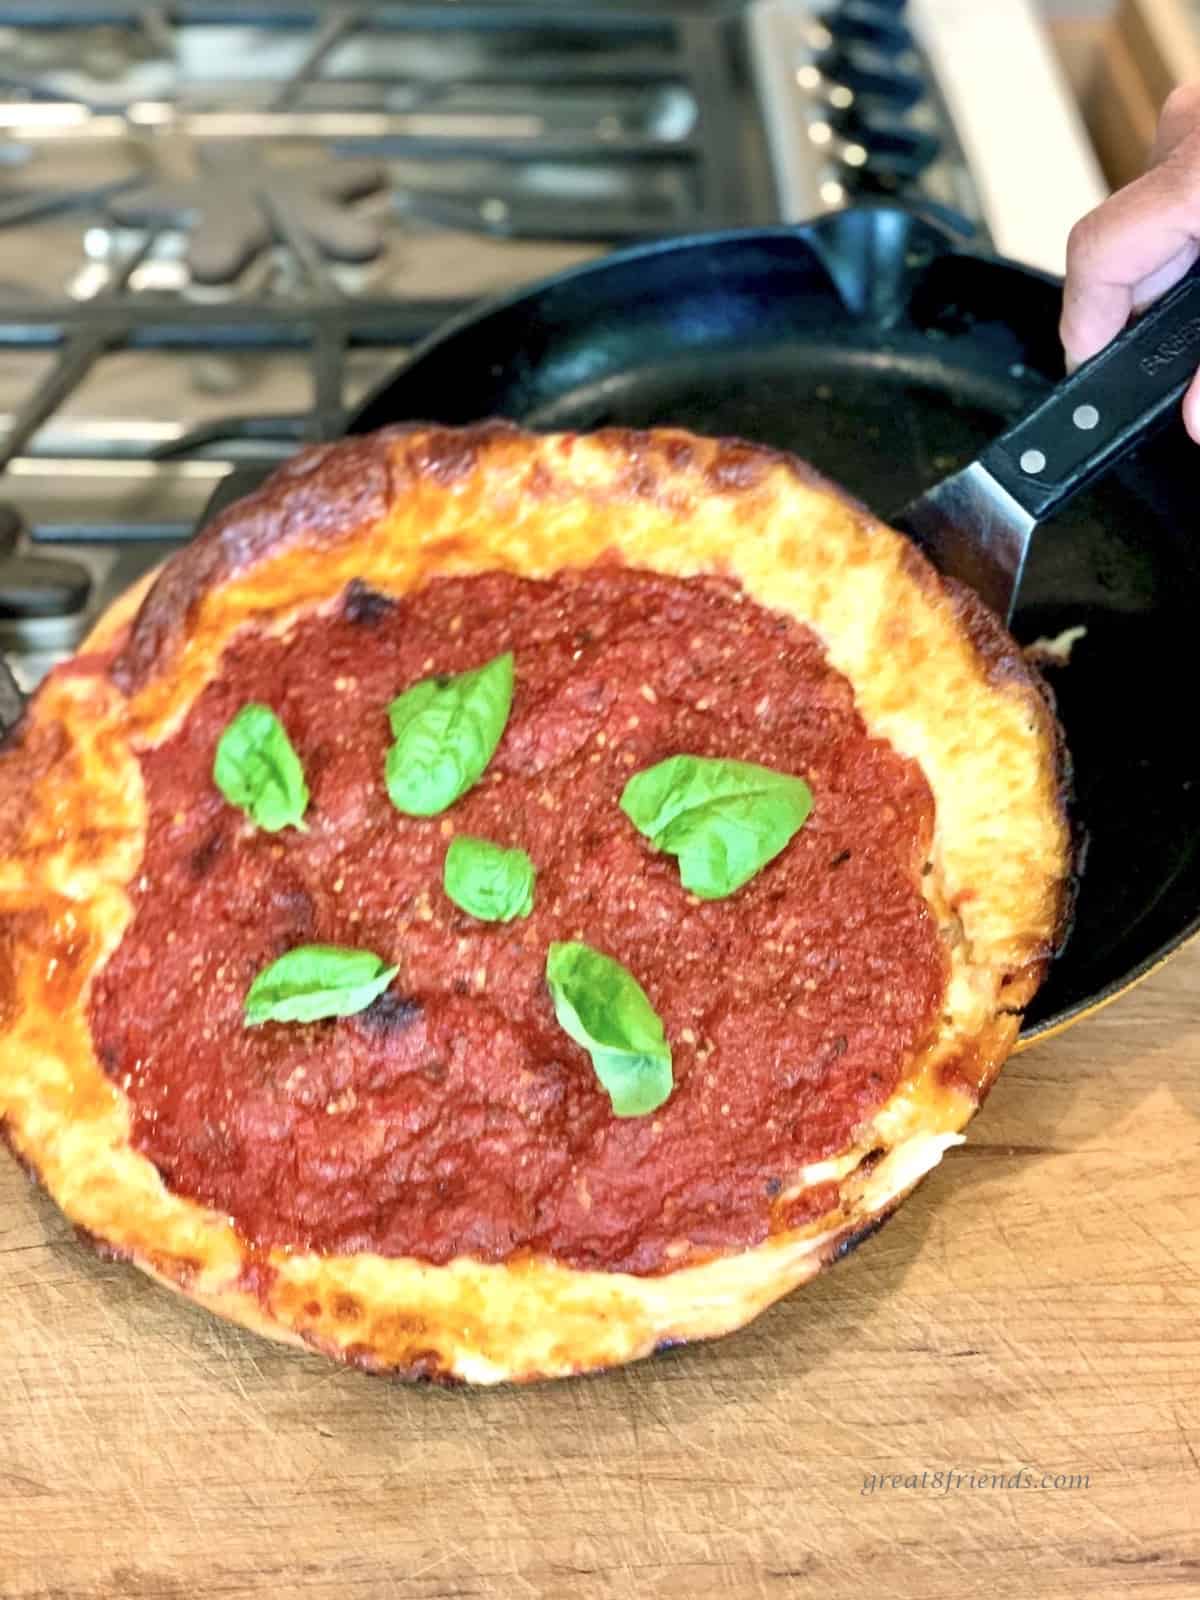 A whole Chicago pizza being slid out of a cast iron skillet with a spatula.